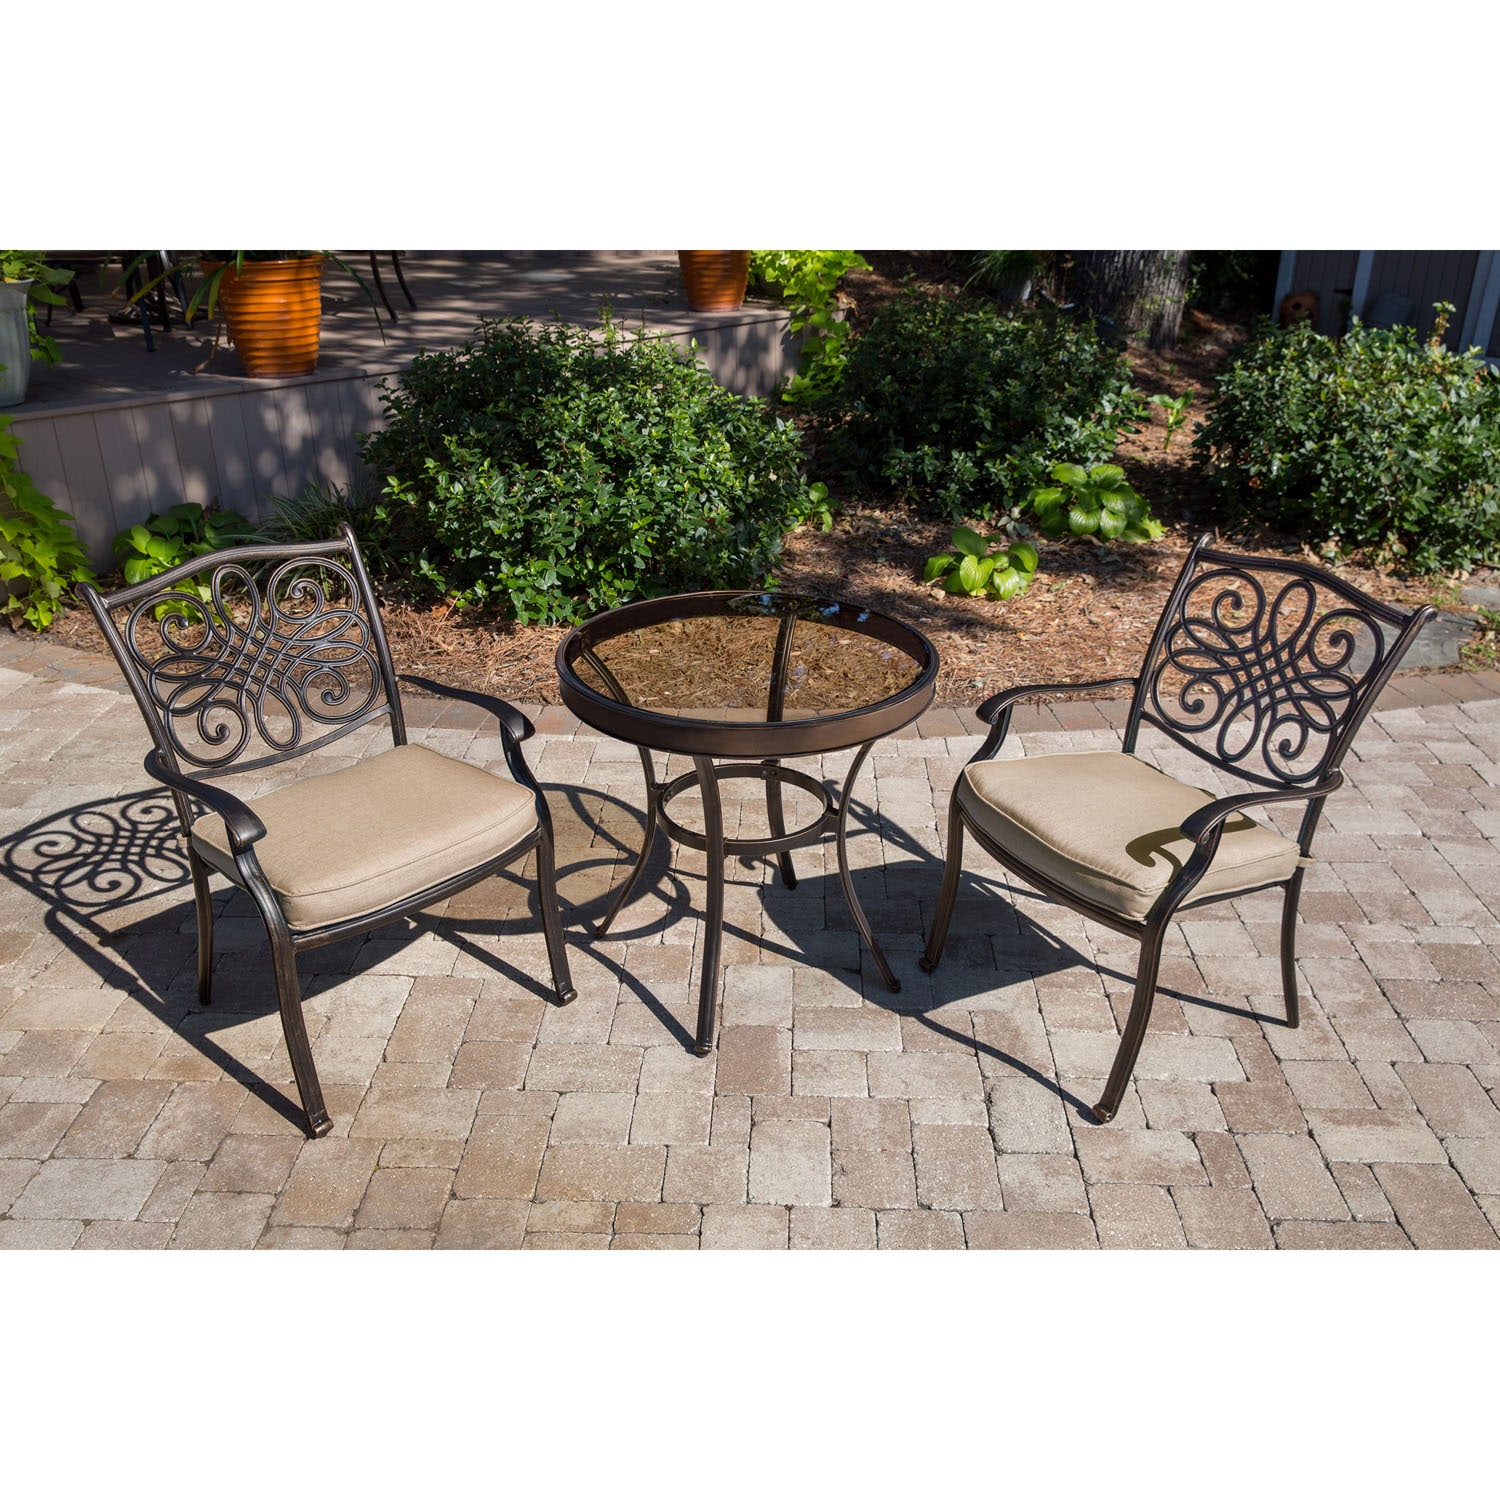 Hanover Traditions 3-Piece Bronze Bistro Patio Dining Set with 2 ...